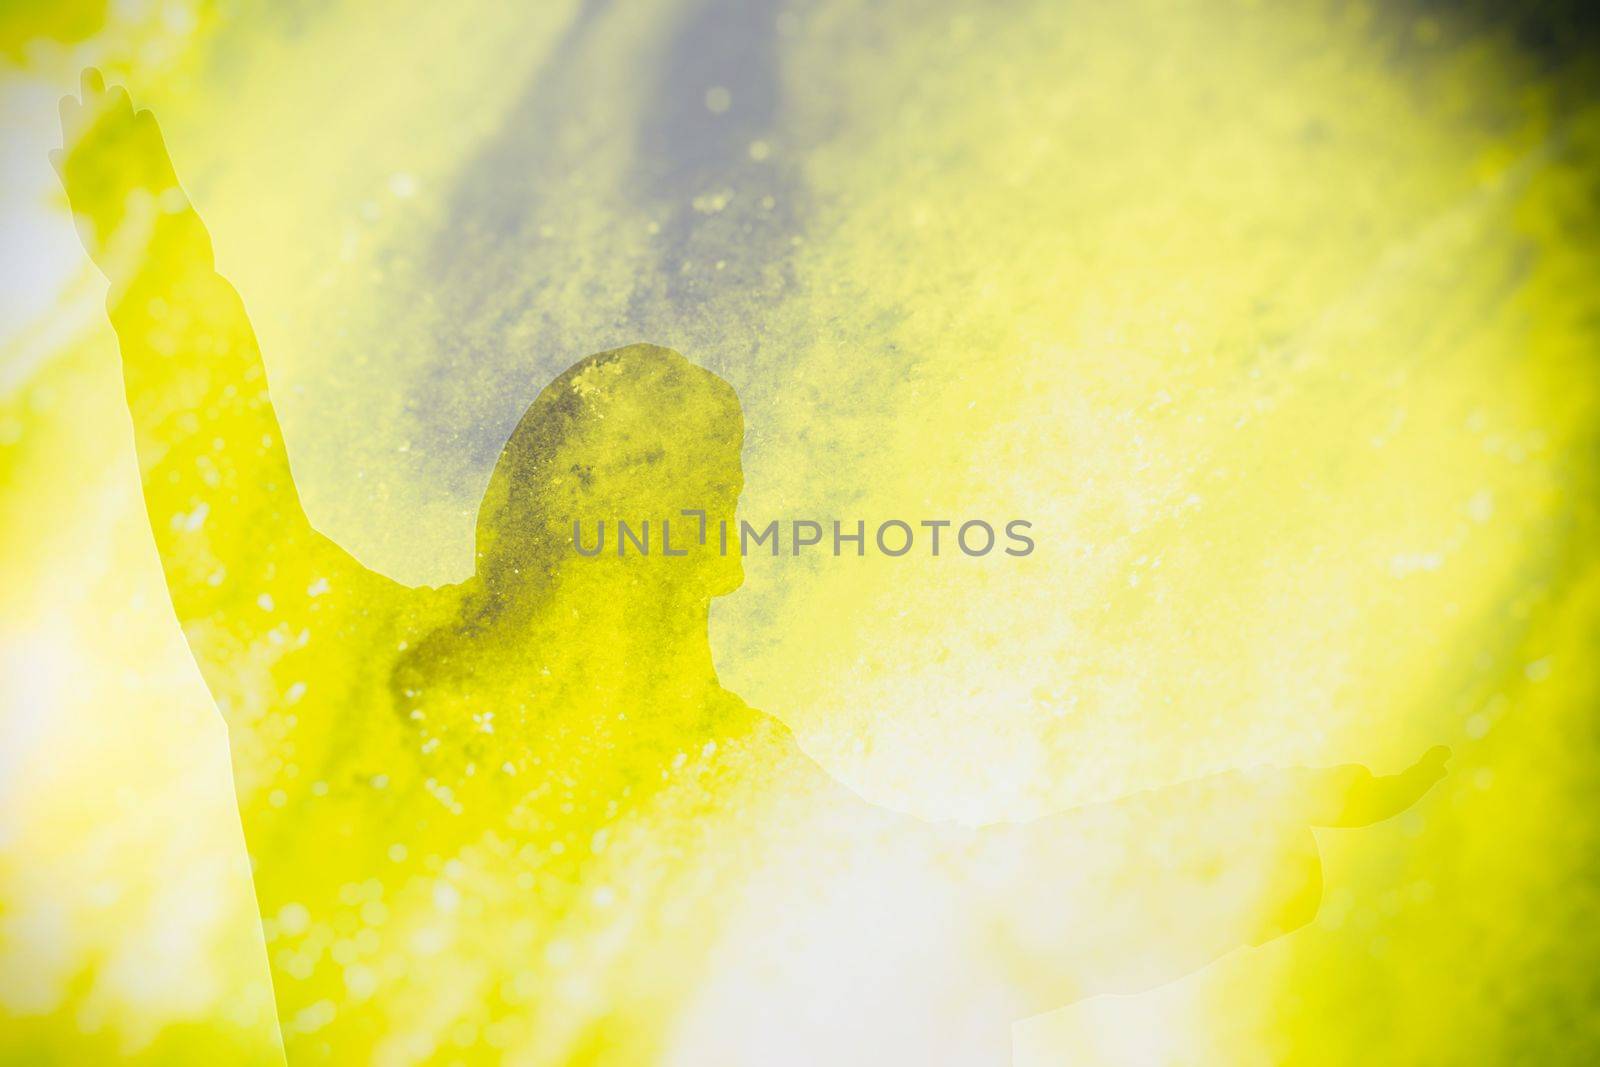 Abstract Double Exposure of Jesus Silhouette with Grunge Light Background.